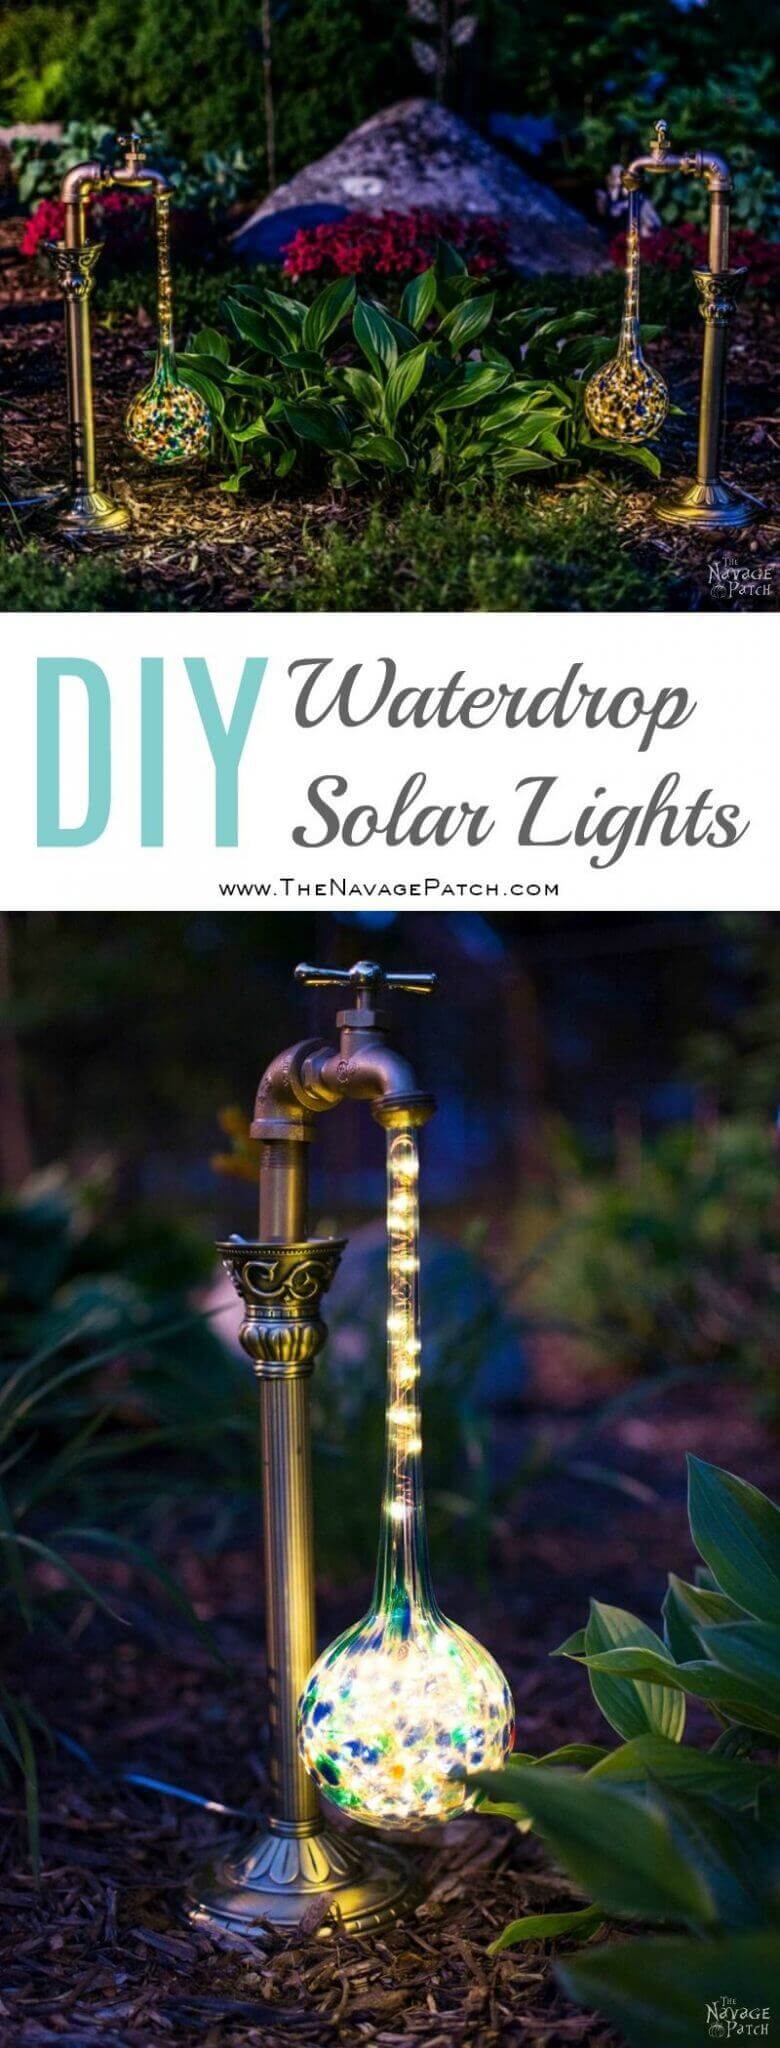 Light Up Your Garden with Water Drops